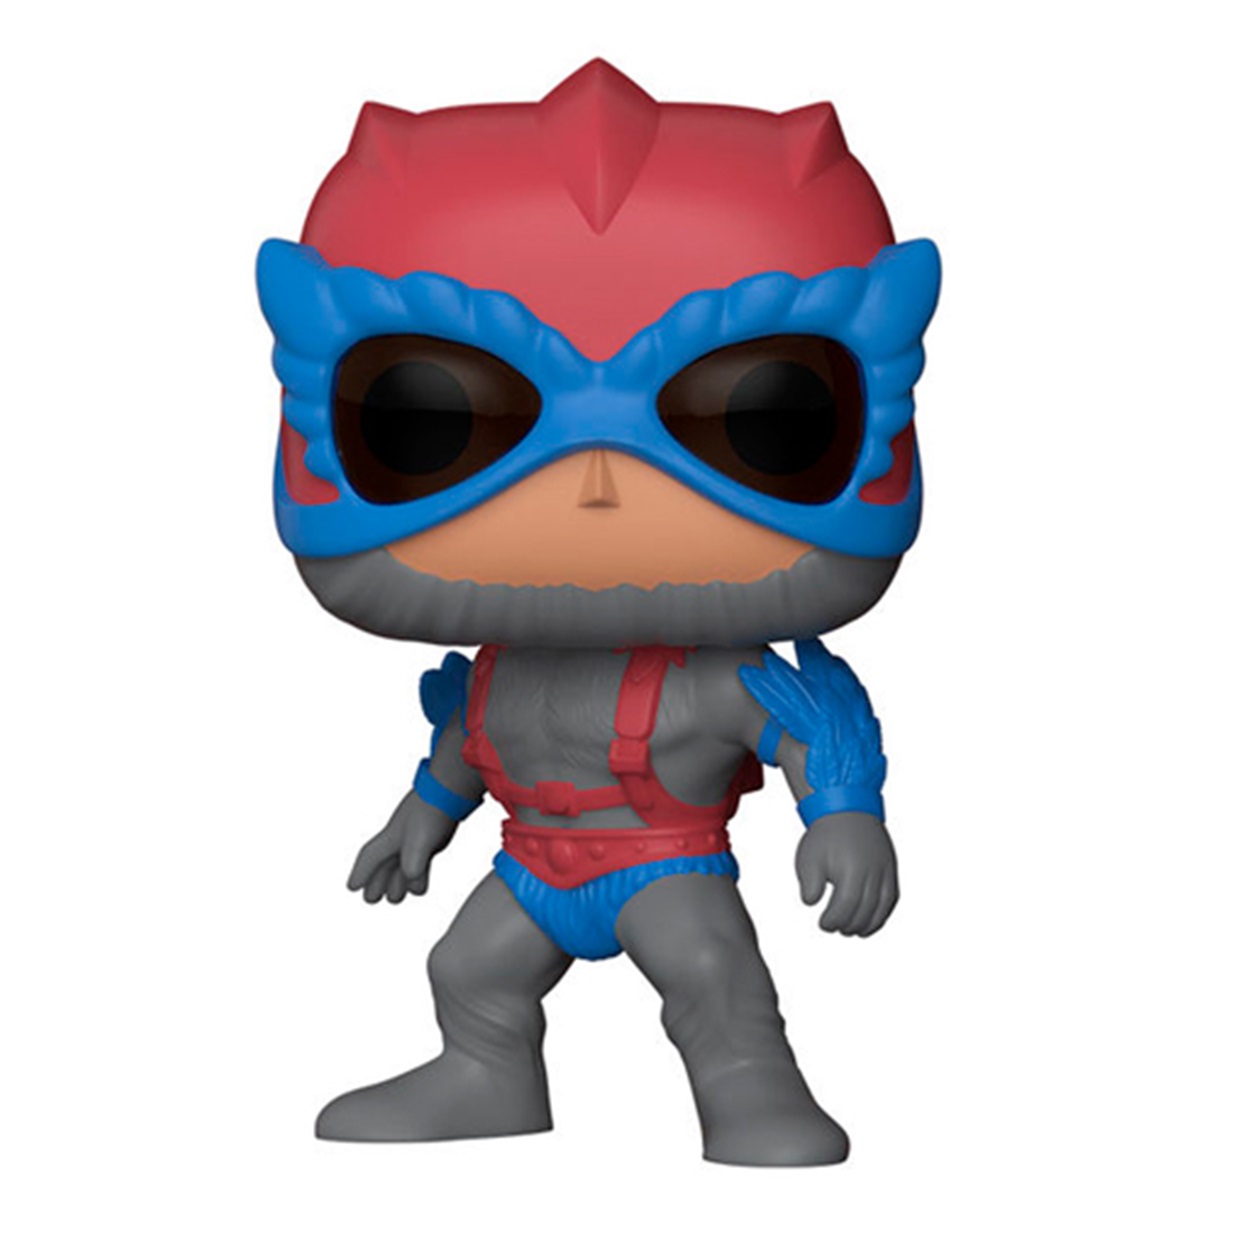 Battle Armor Stratos #567 Masters Of The Universe Funko Pop!